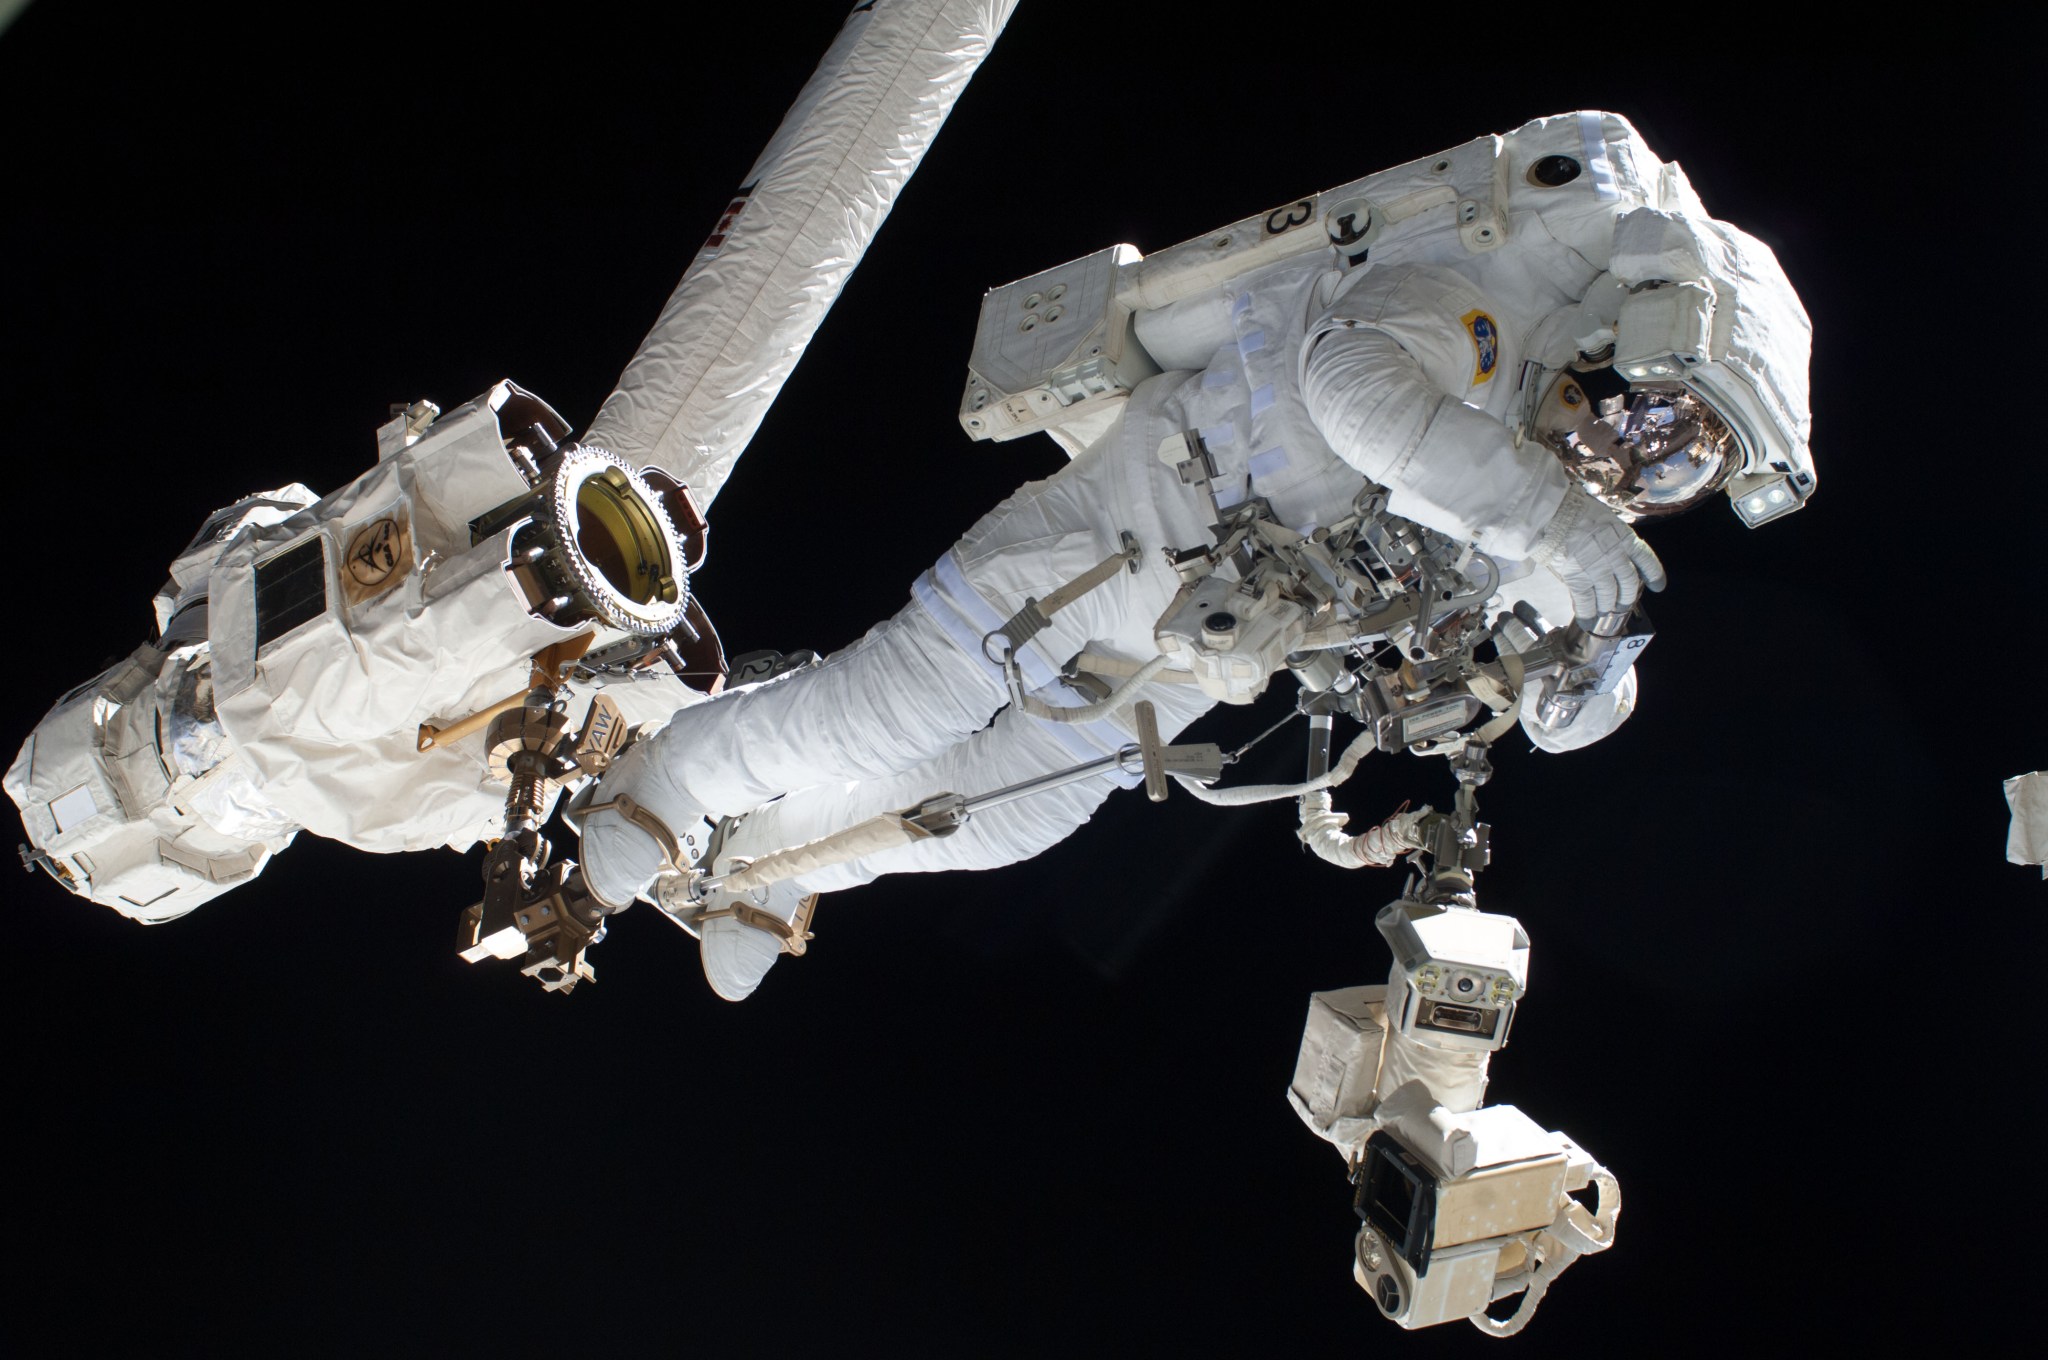 Flight Engineer Luca Parmitano rides Canadarm2 to an International Space Station worksite during Tuesday's Expedition 36 spacewalk.